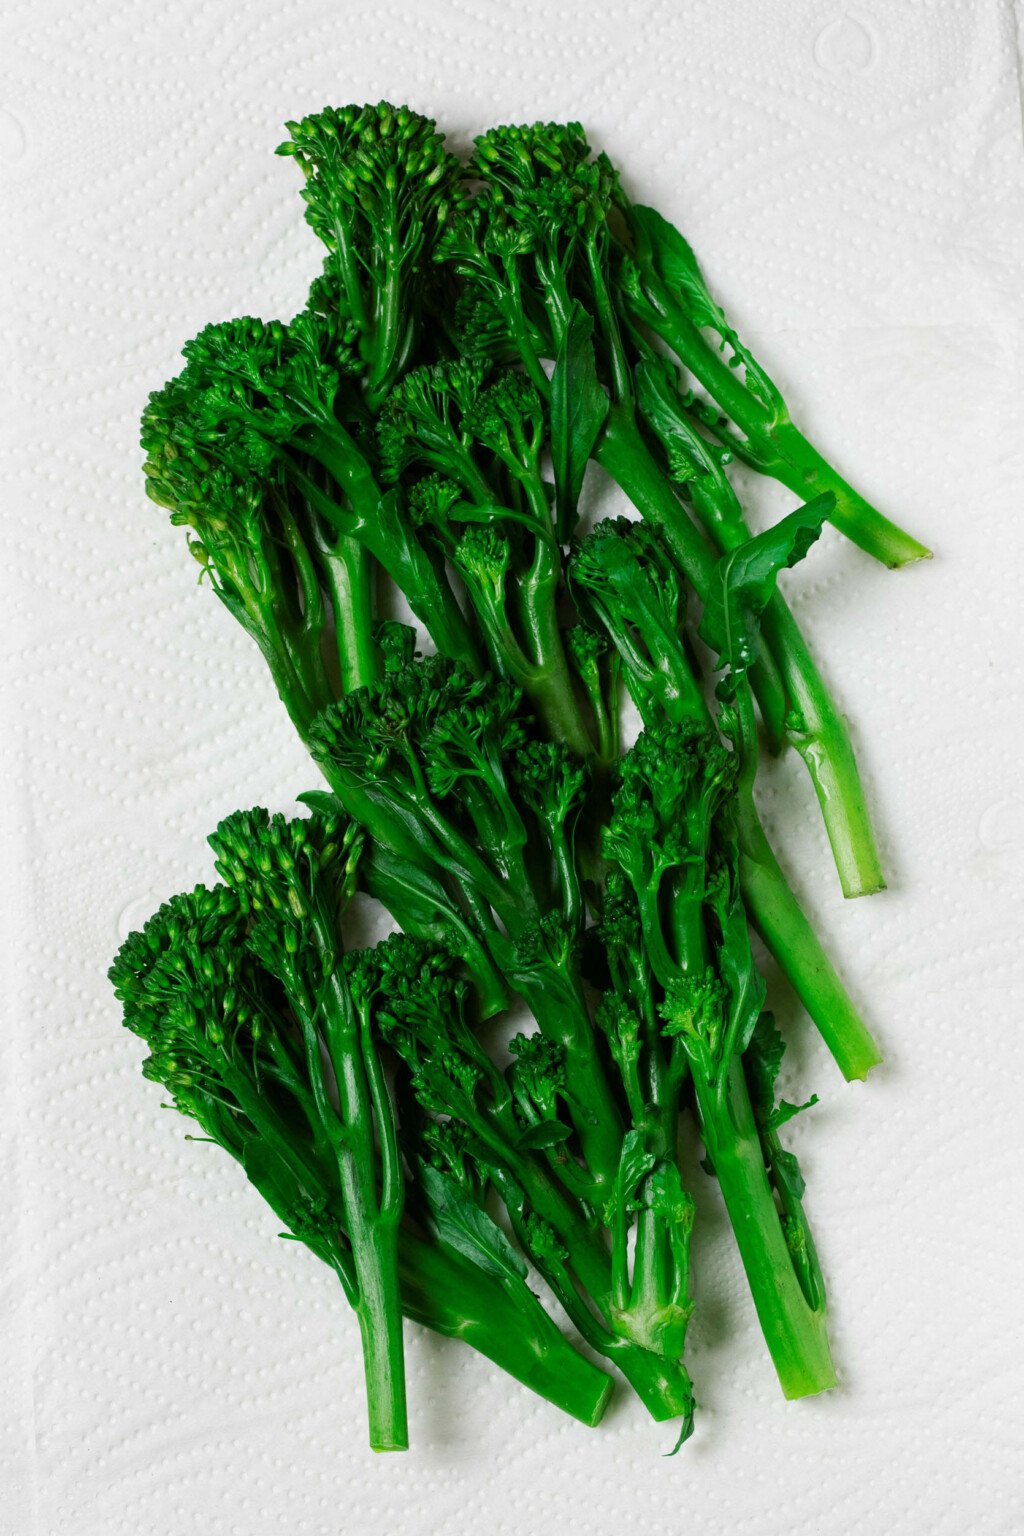 An overhead image of vibrant green, steamed baby broccoli, resting on a white surface.